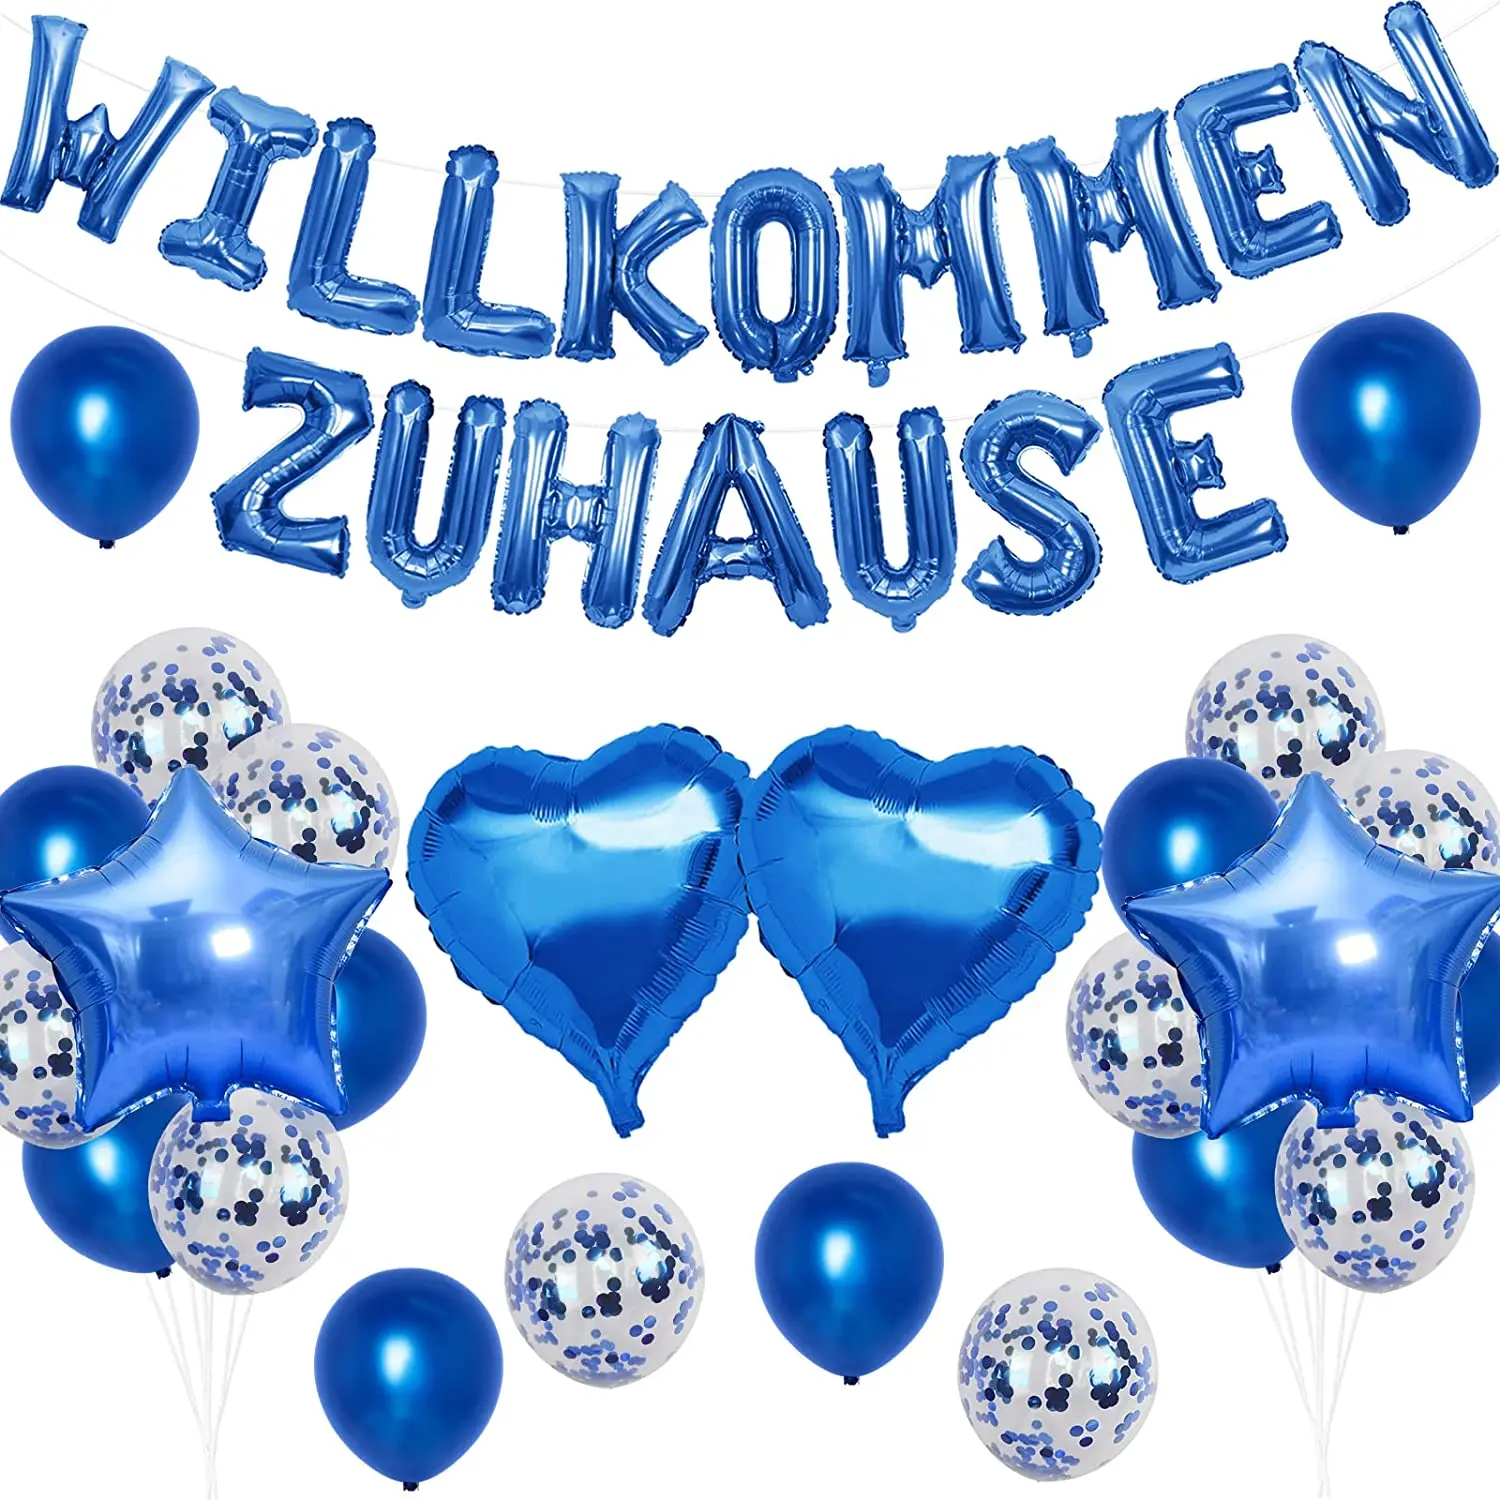 

Welcome Home Decor with Blue Willkommen Zuhause Letter Banner Star and Heart Foil Balloons for Baby Shower Home Family Party